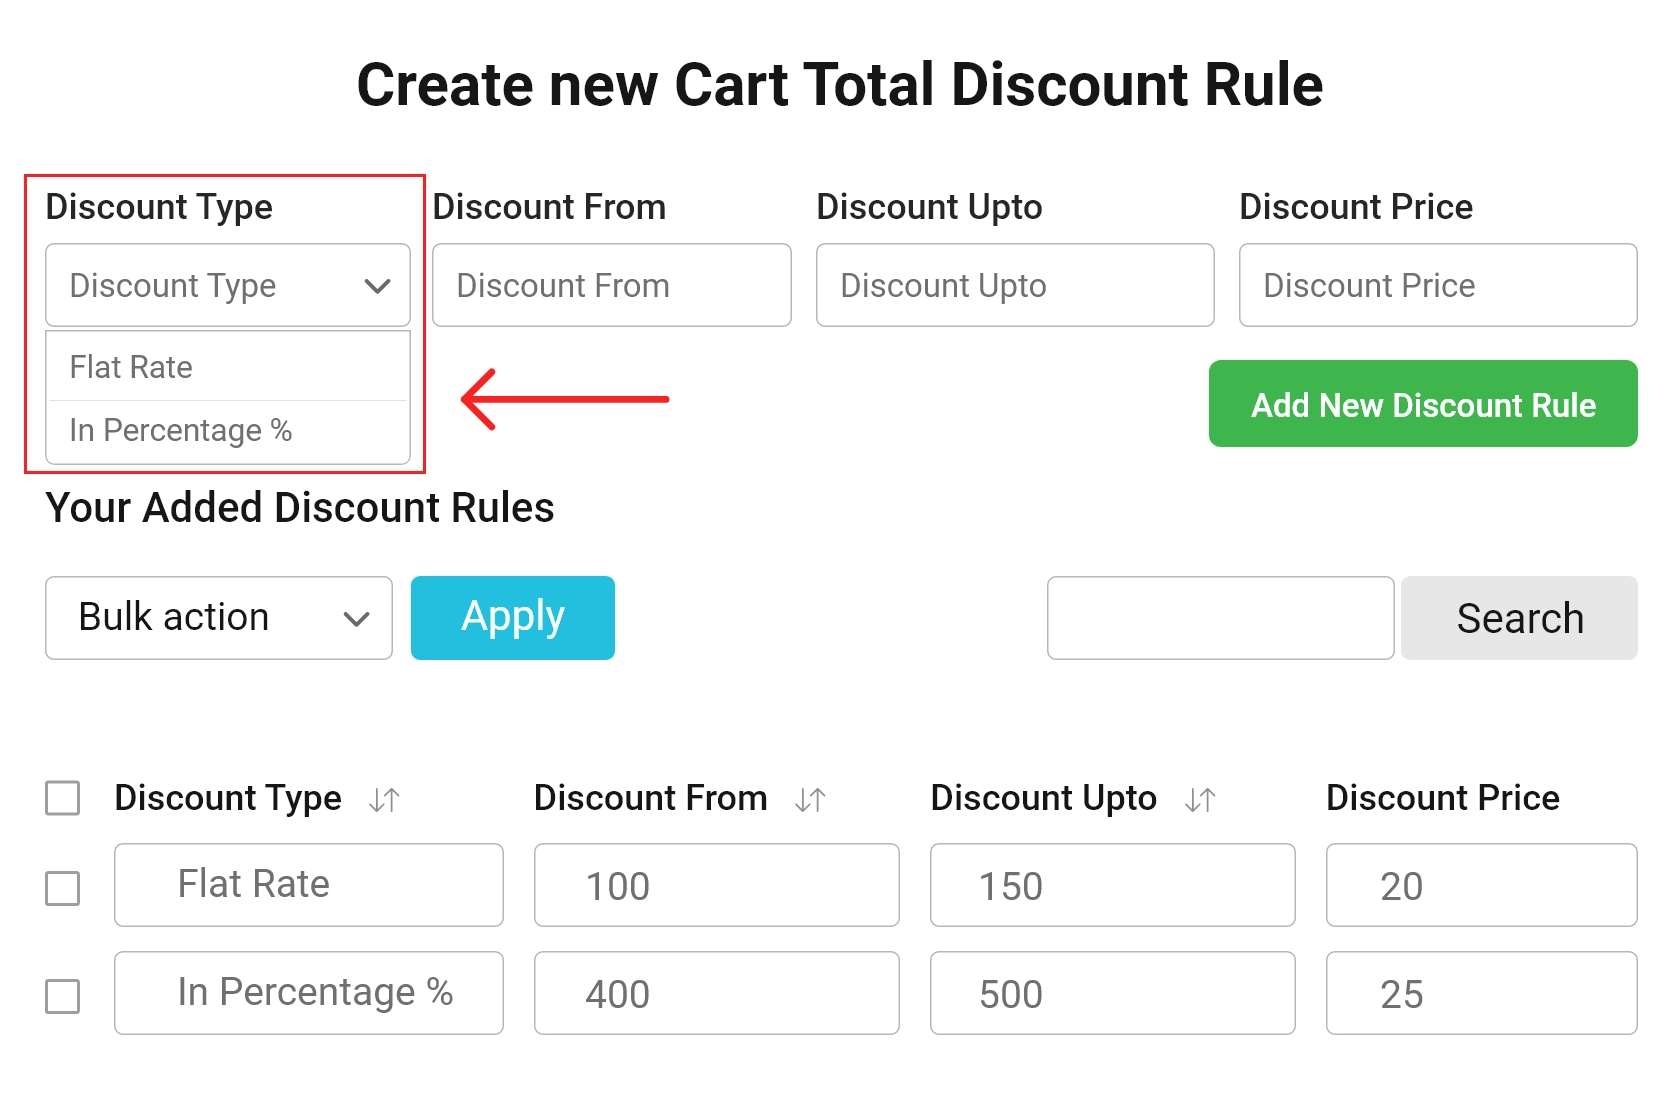 Whole Store discount irrespective of user and user roles